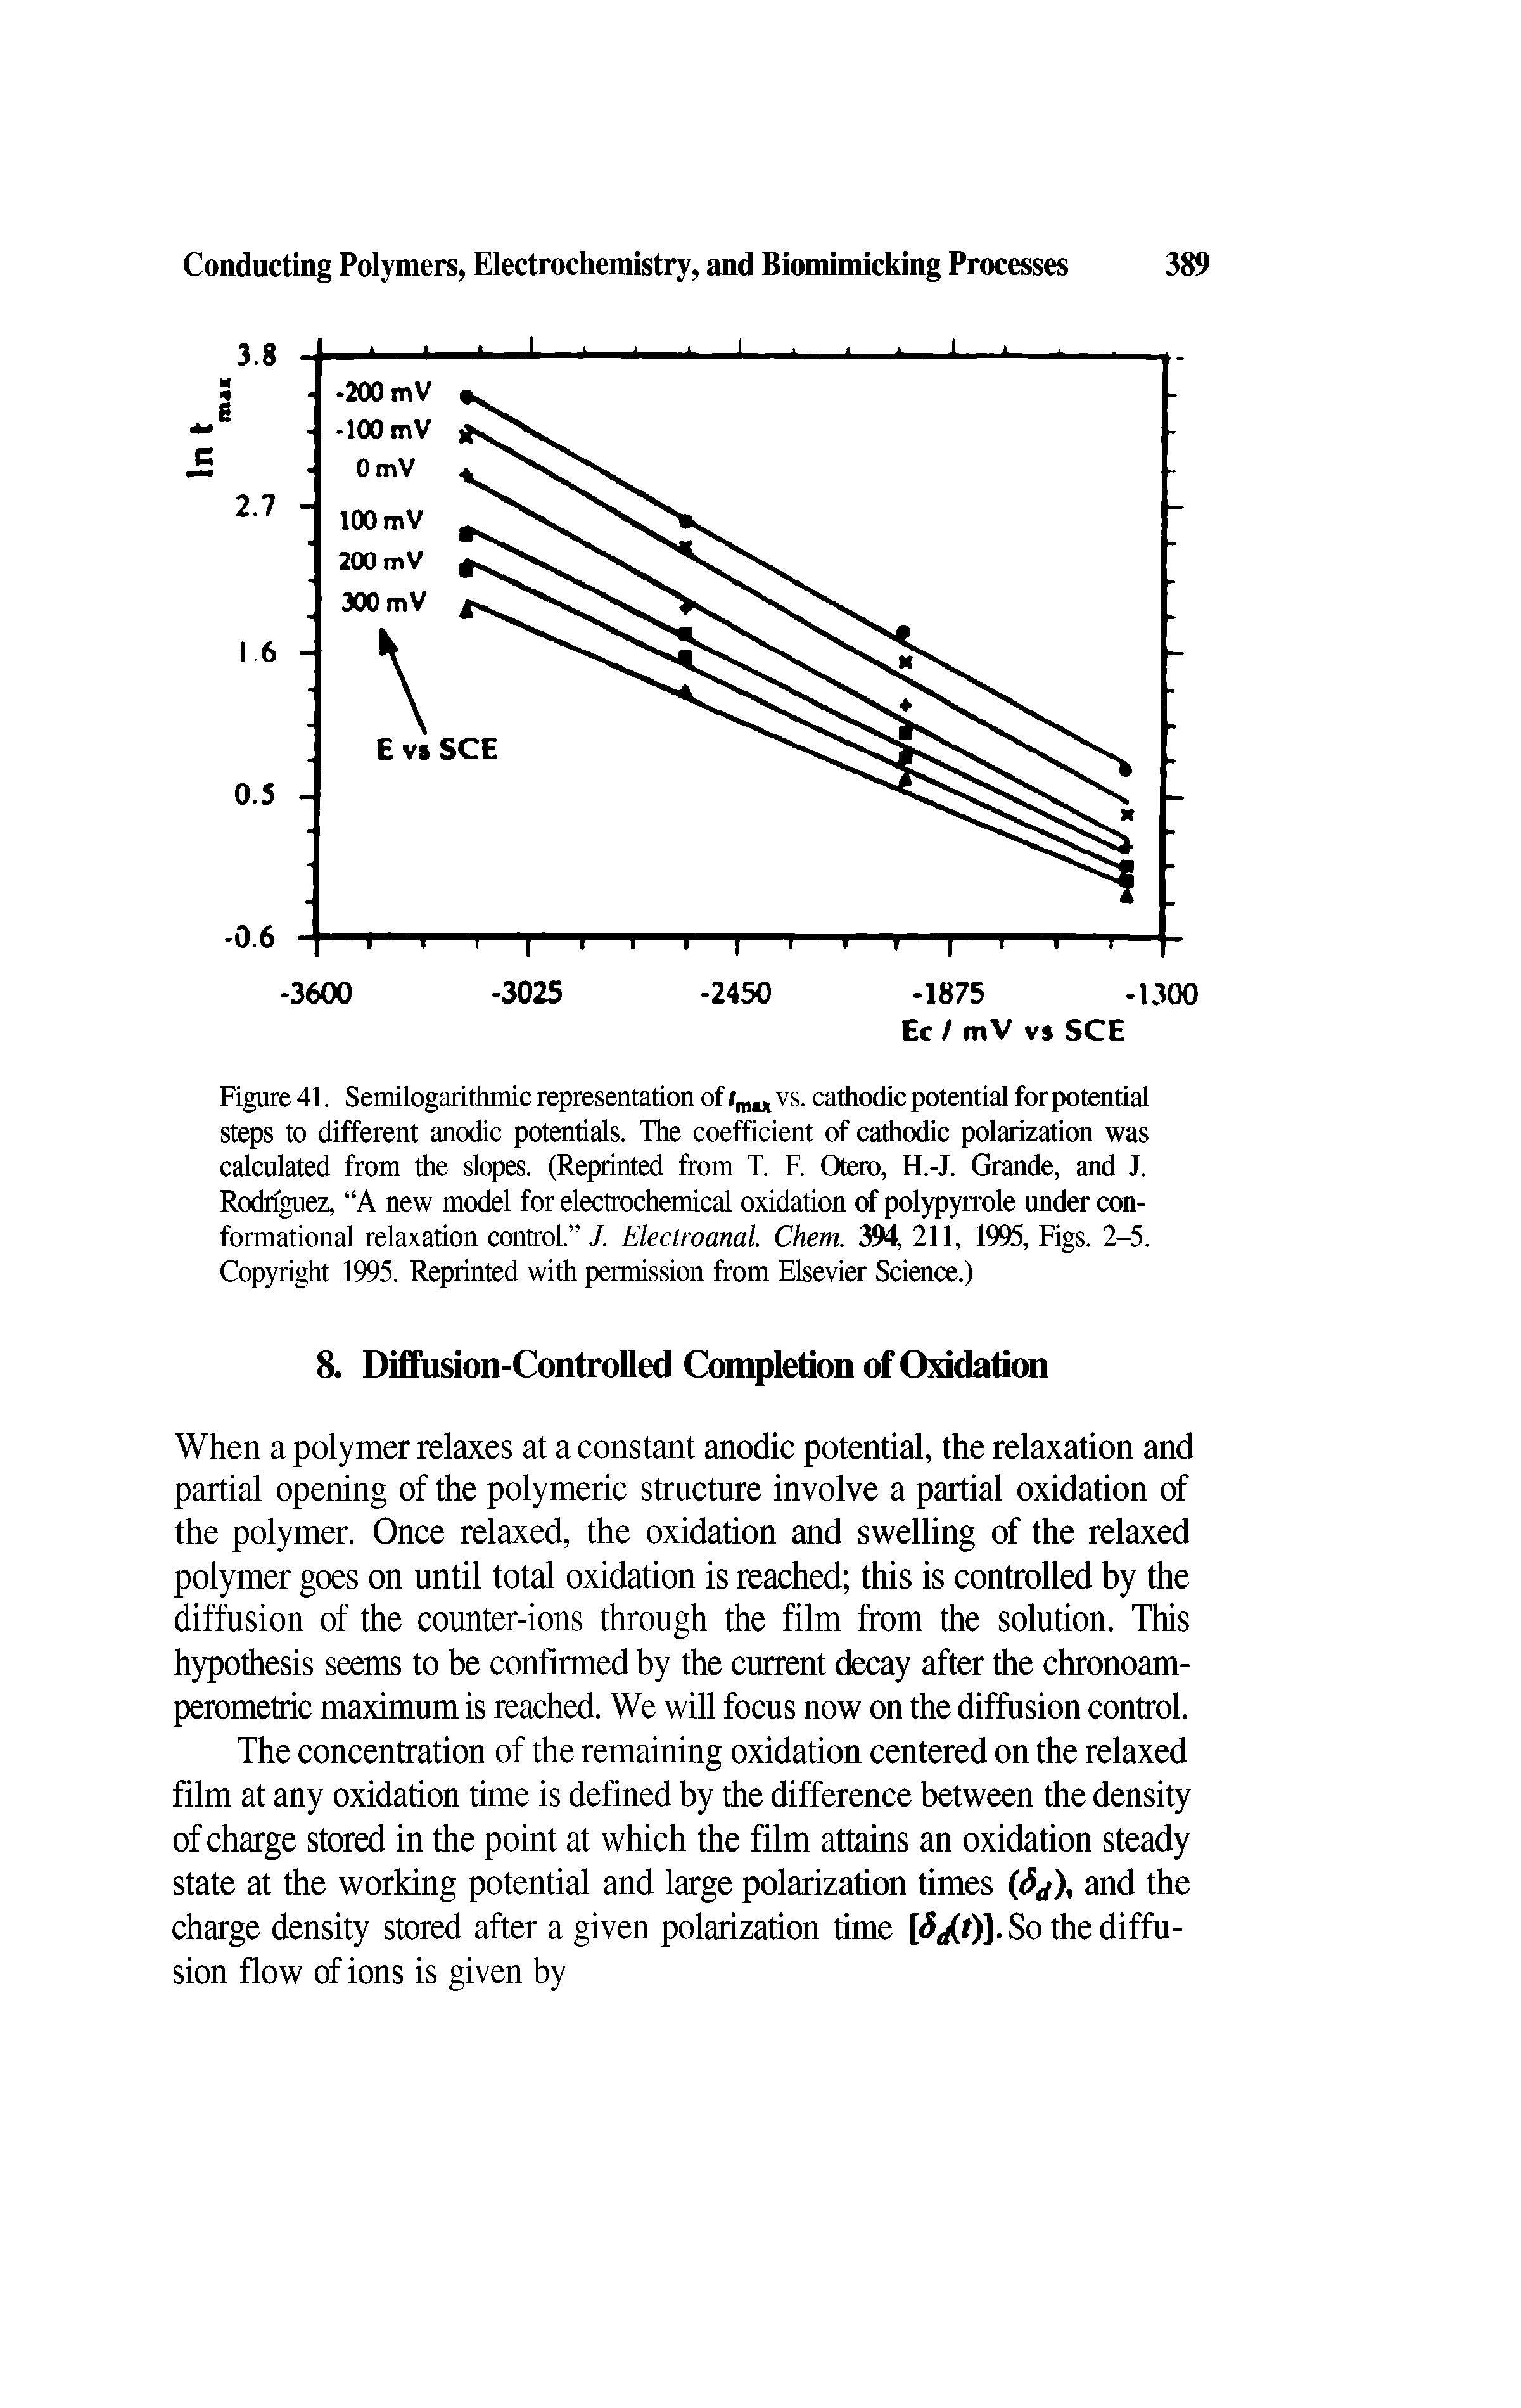 Figure 41. Semilogarithmic representation of /mM vs. cathodic potential for potential steps to different anodic potentials. The coefficient of cathodic polarization was calculated from the slopes. (Reprinted from T. F. Otero, H.-J. Grande, and J. Rodriguez, A new model for electrochemical oxidation of polypyrrole under conformational relaxation control. J. Electroanal. Chem. 394, 211, 1995, Figs. 2-5. Copyright 1995. Reprinted with permission from Elsevier Science.)...